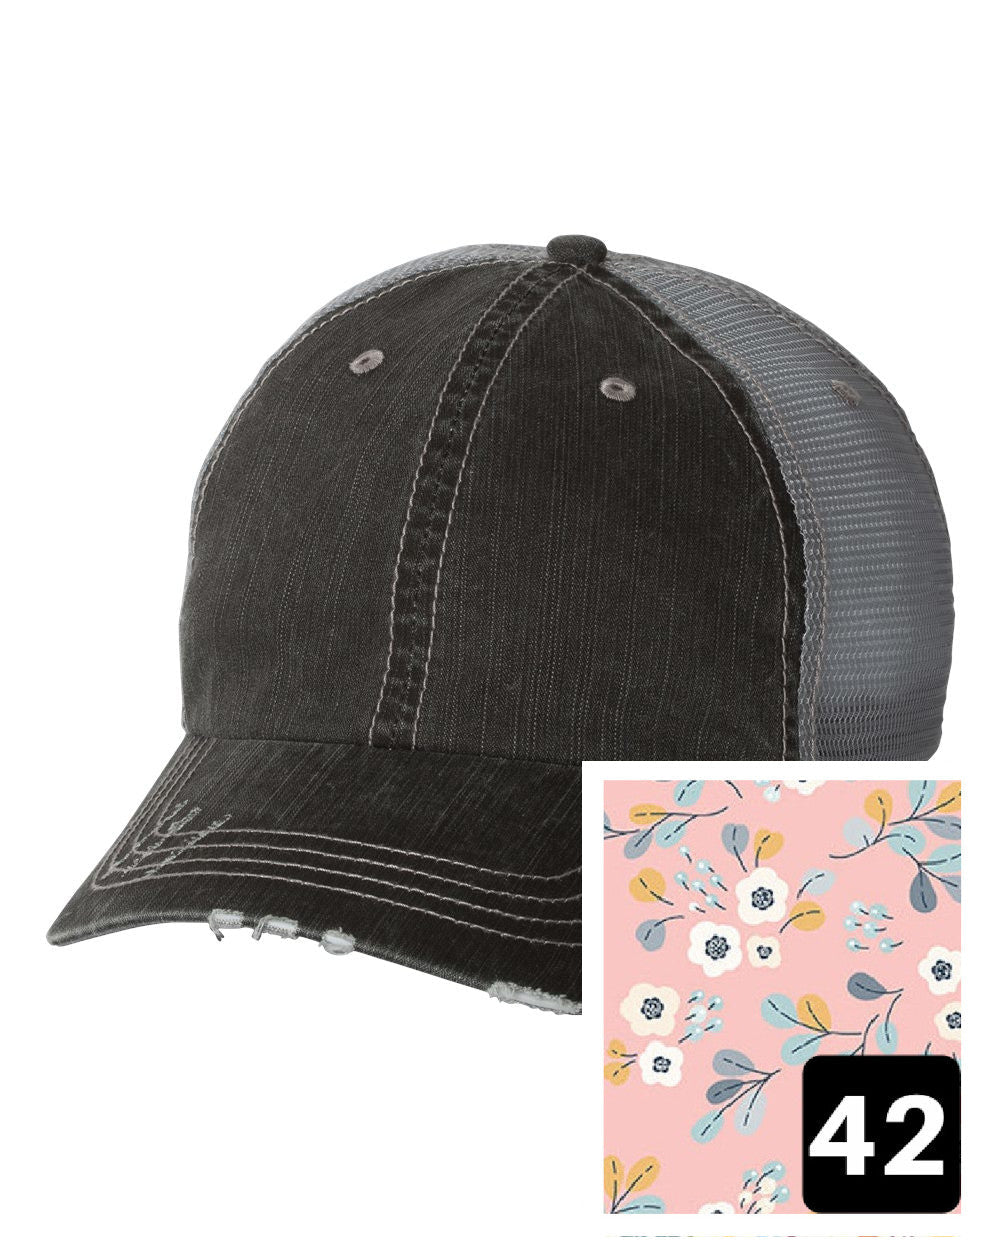 gray distressed trucker hat with light blue and pink mosaic fabric state of Arizona